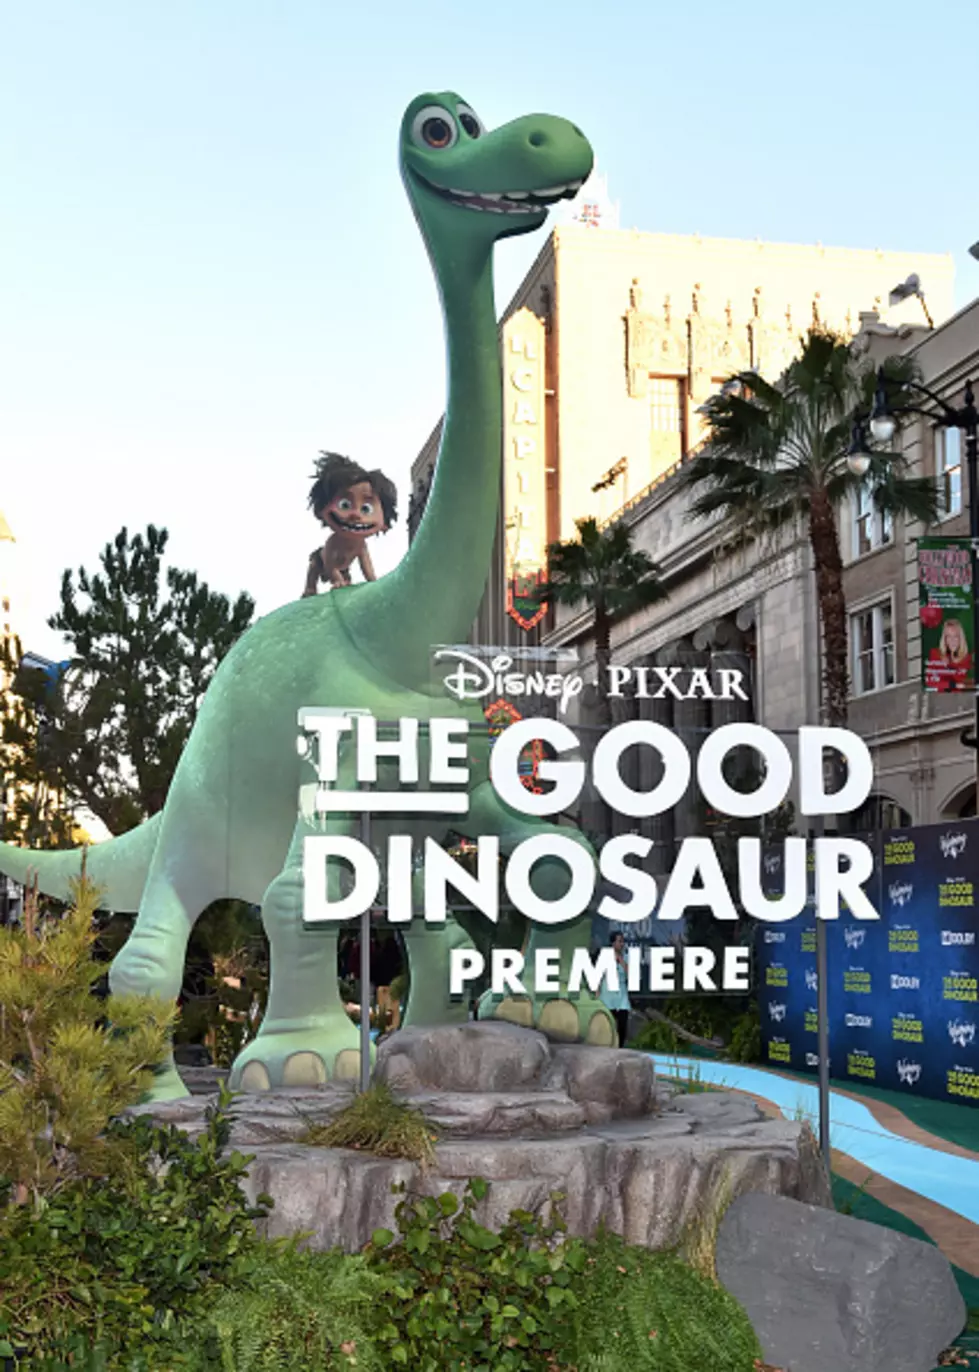 Wyoming&#8217;s &#8220;Good Dinosaur&#8221; Movie Finishes Second at the Box Office